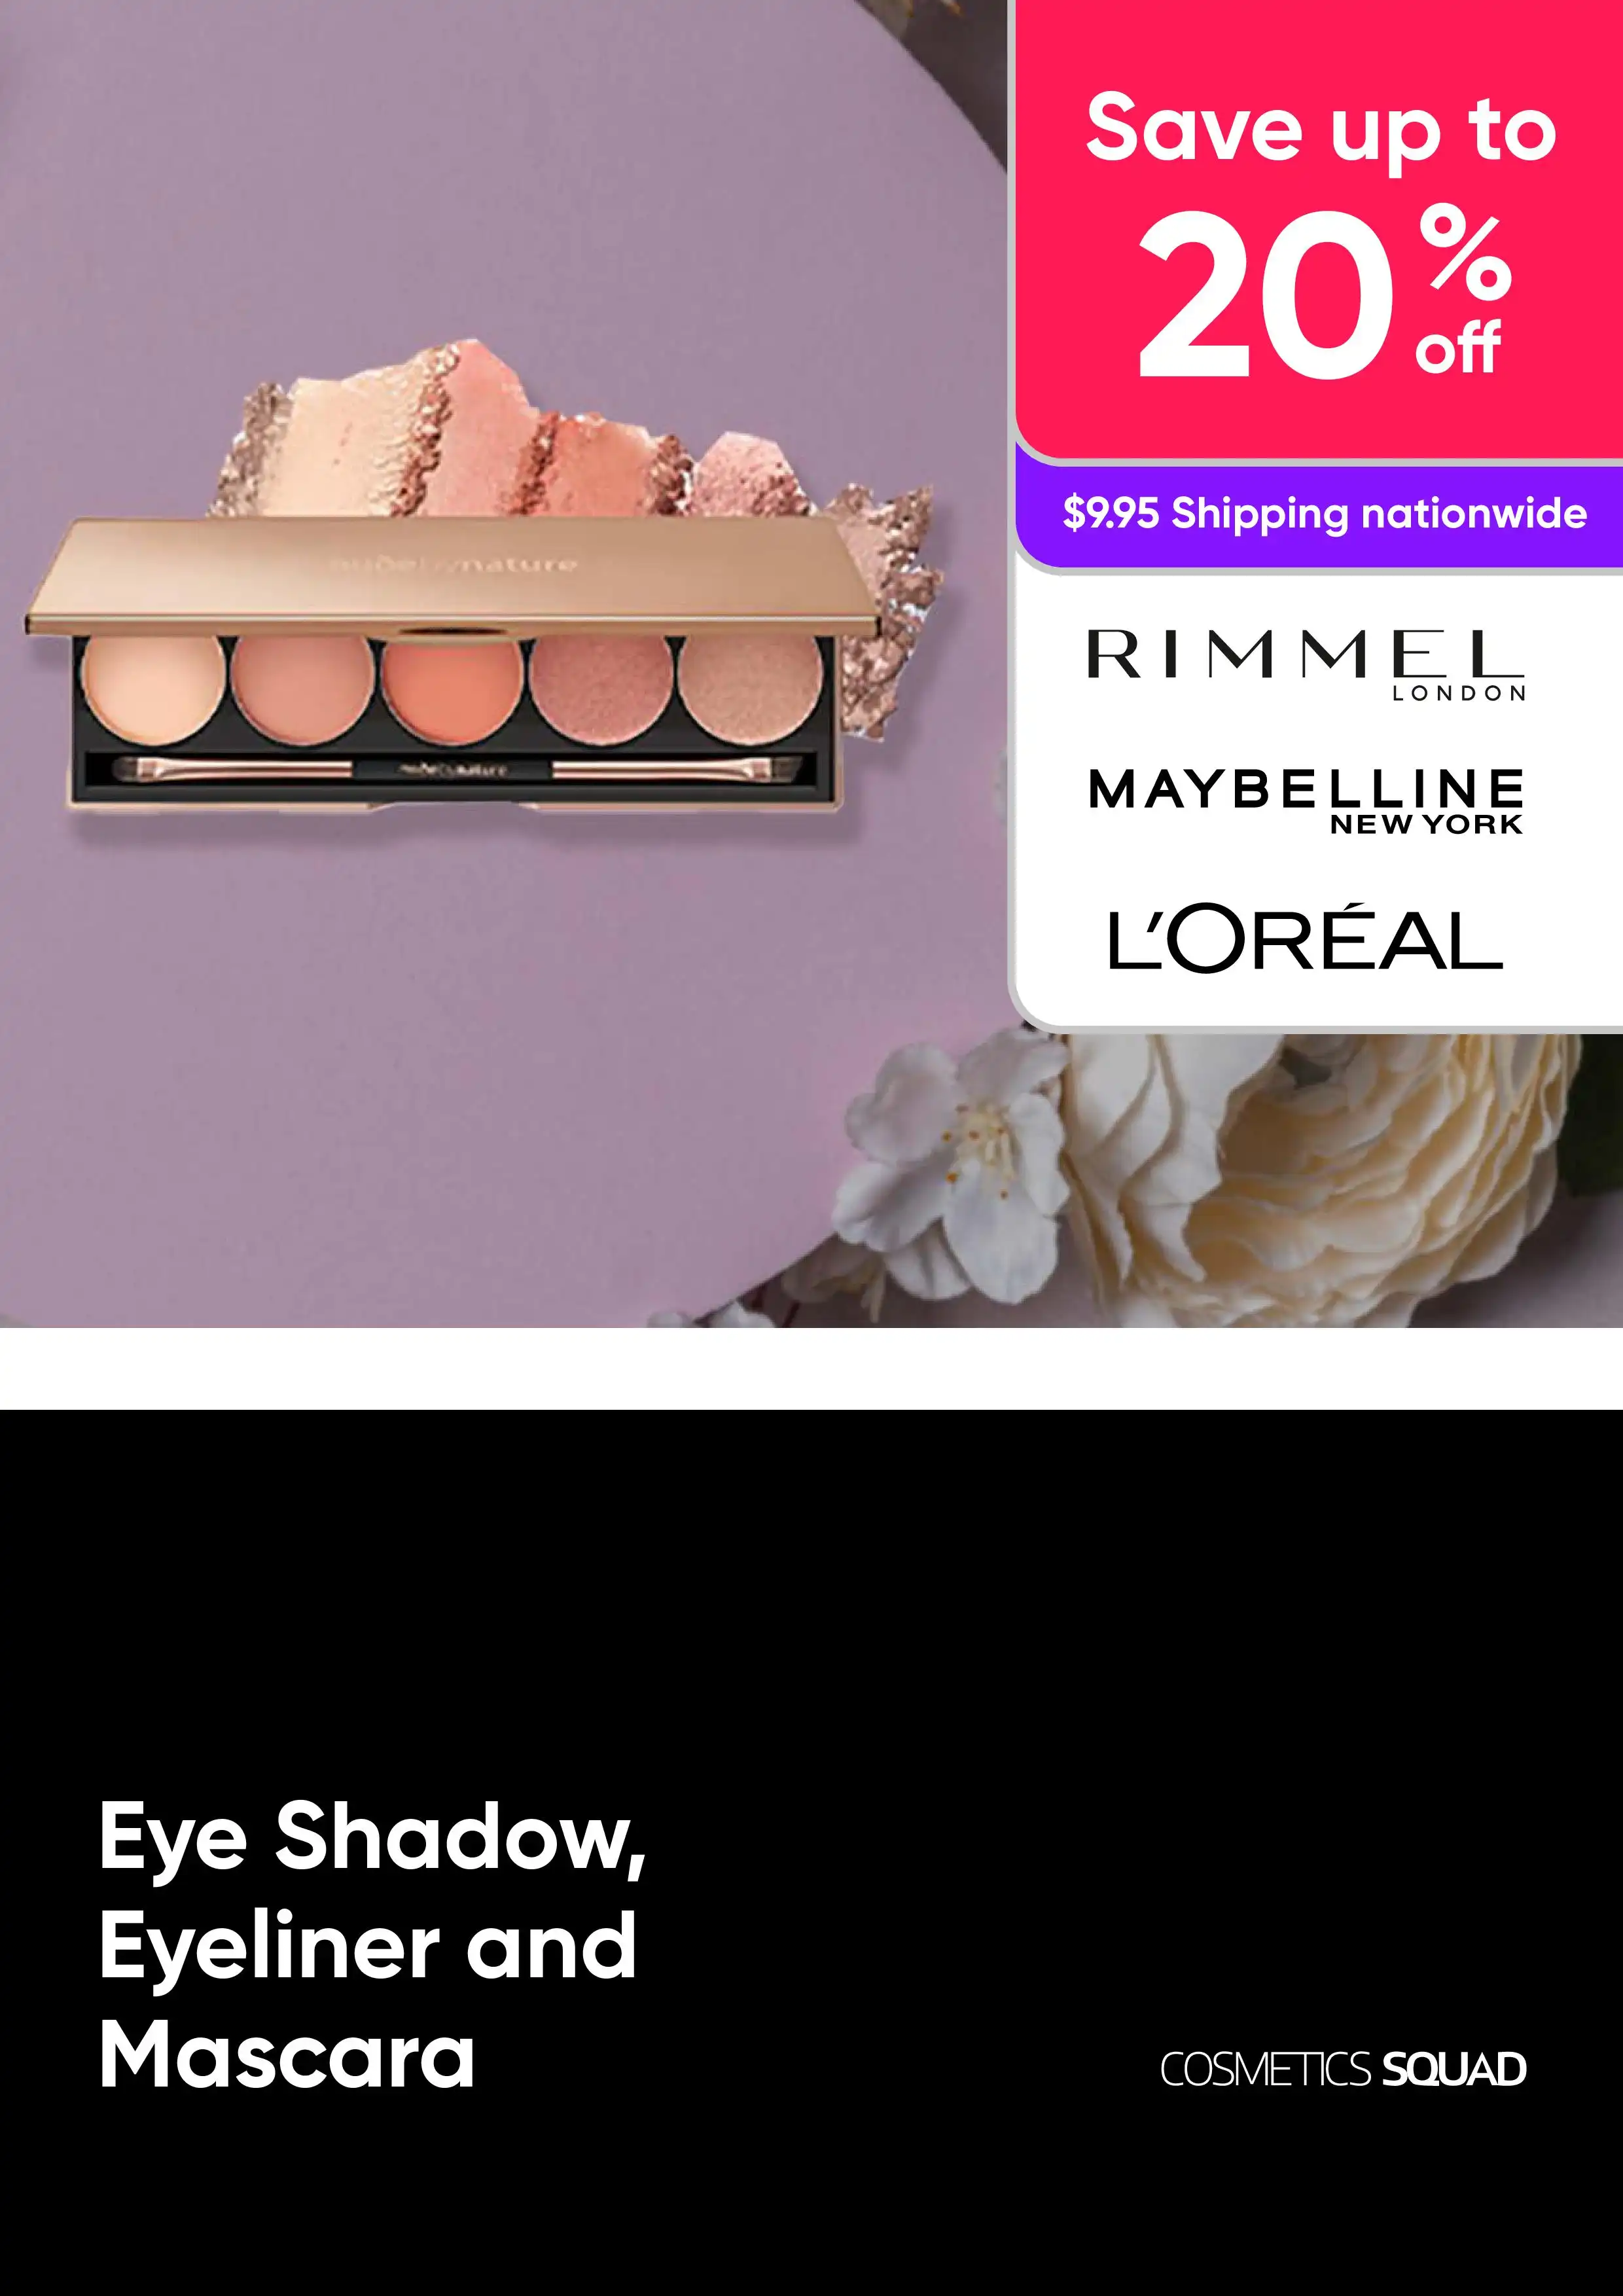 Eye Makeup Specials - Eye Shadow, Eyeliner and Mascara - Maybelline, L'Oreal - Deals from $7.99